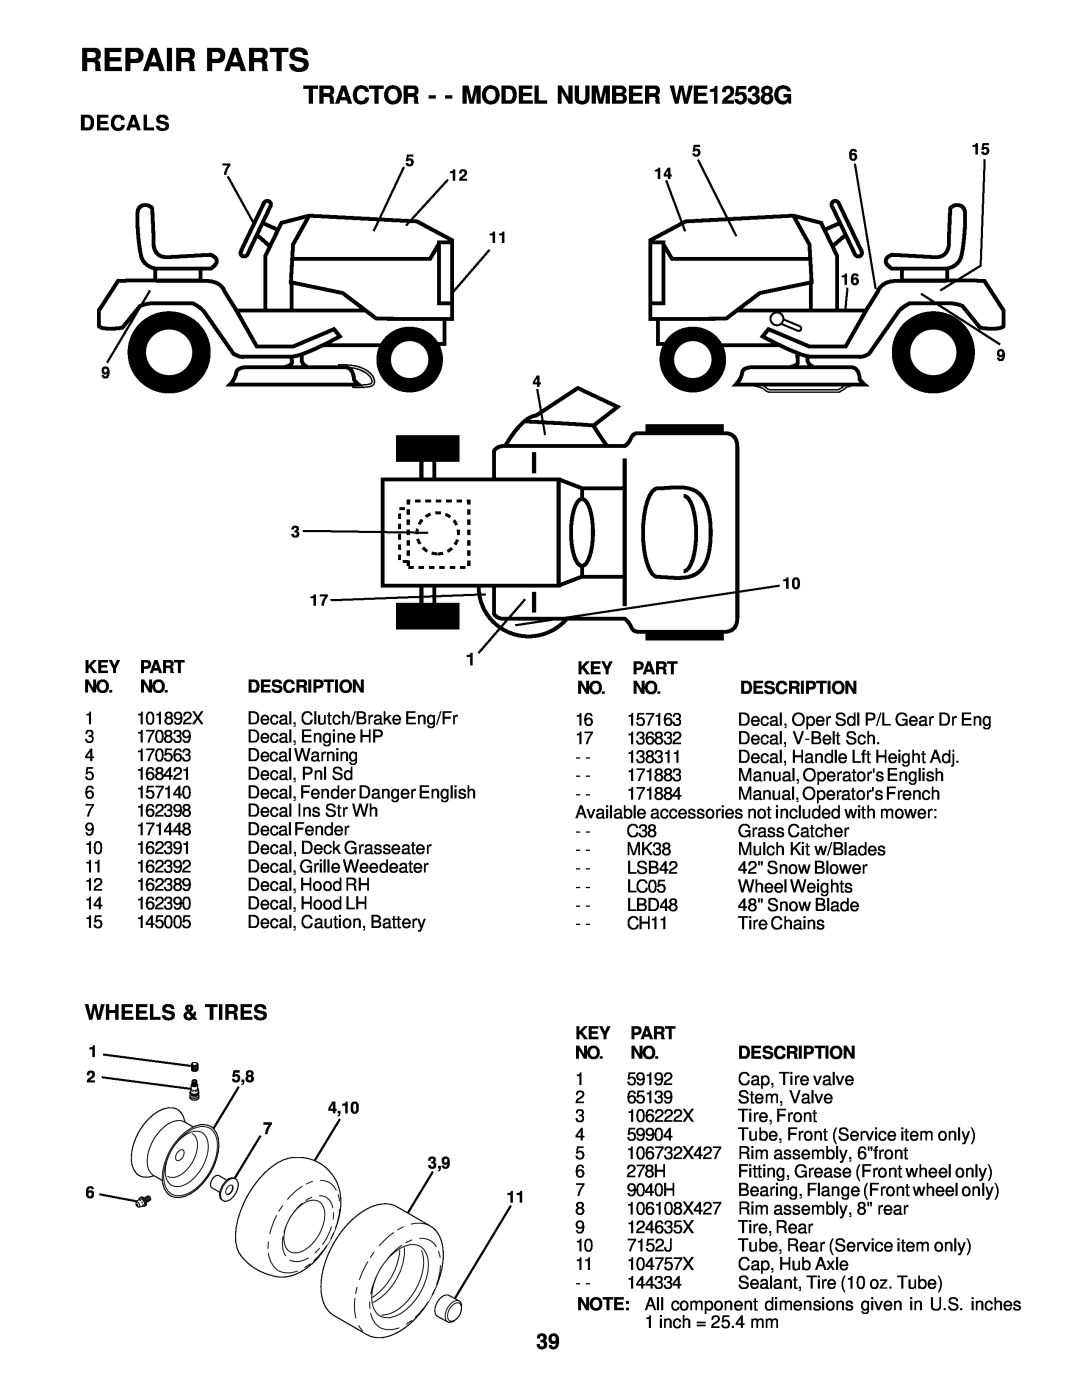 Weed Eater 171883 manual Decals, Wheels & Tires, Repair Parts, TRACTOR - - MODEL NUMBER WE12538G, Description 